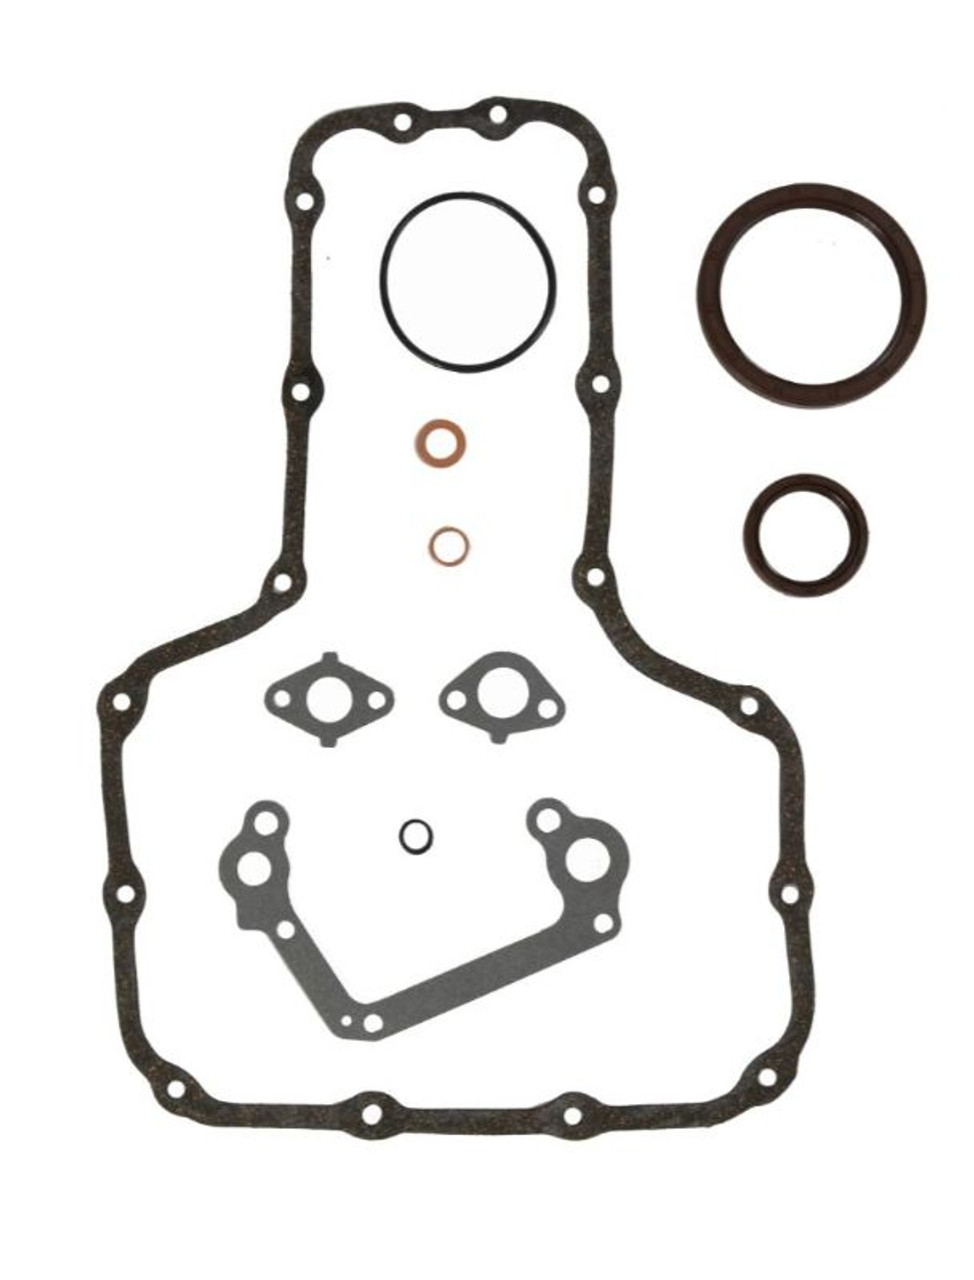 2002 Toyota Corolla 1.8L Engine Lower Gasket Set TO1.8CS-A -13